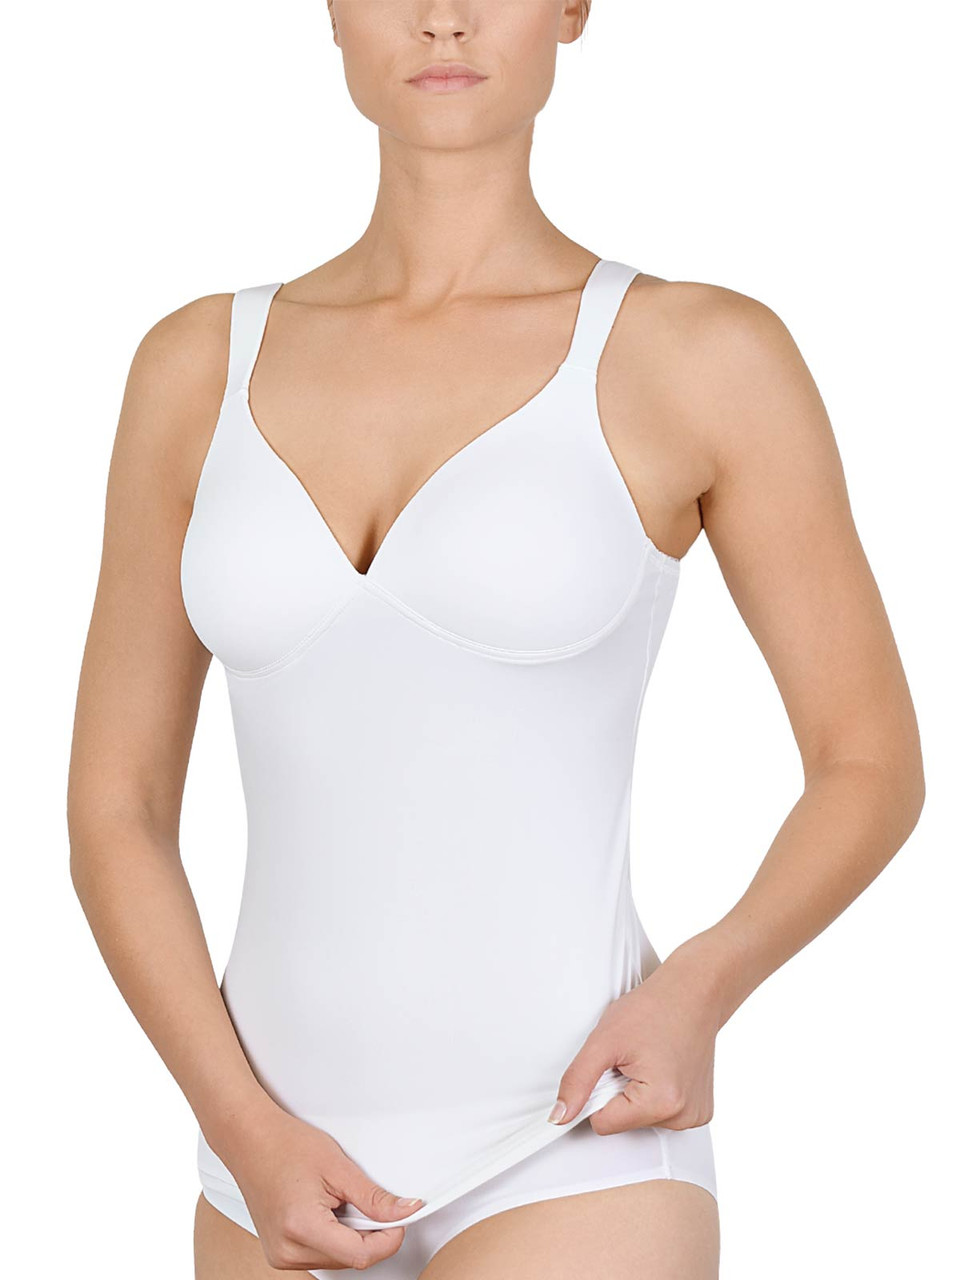 100% Cotton Thick Straps Camisole (S- 5XL) by Naturana 2504